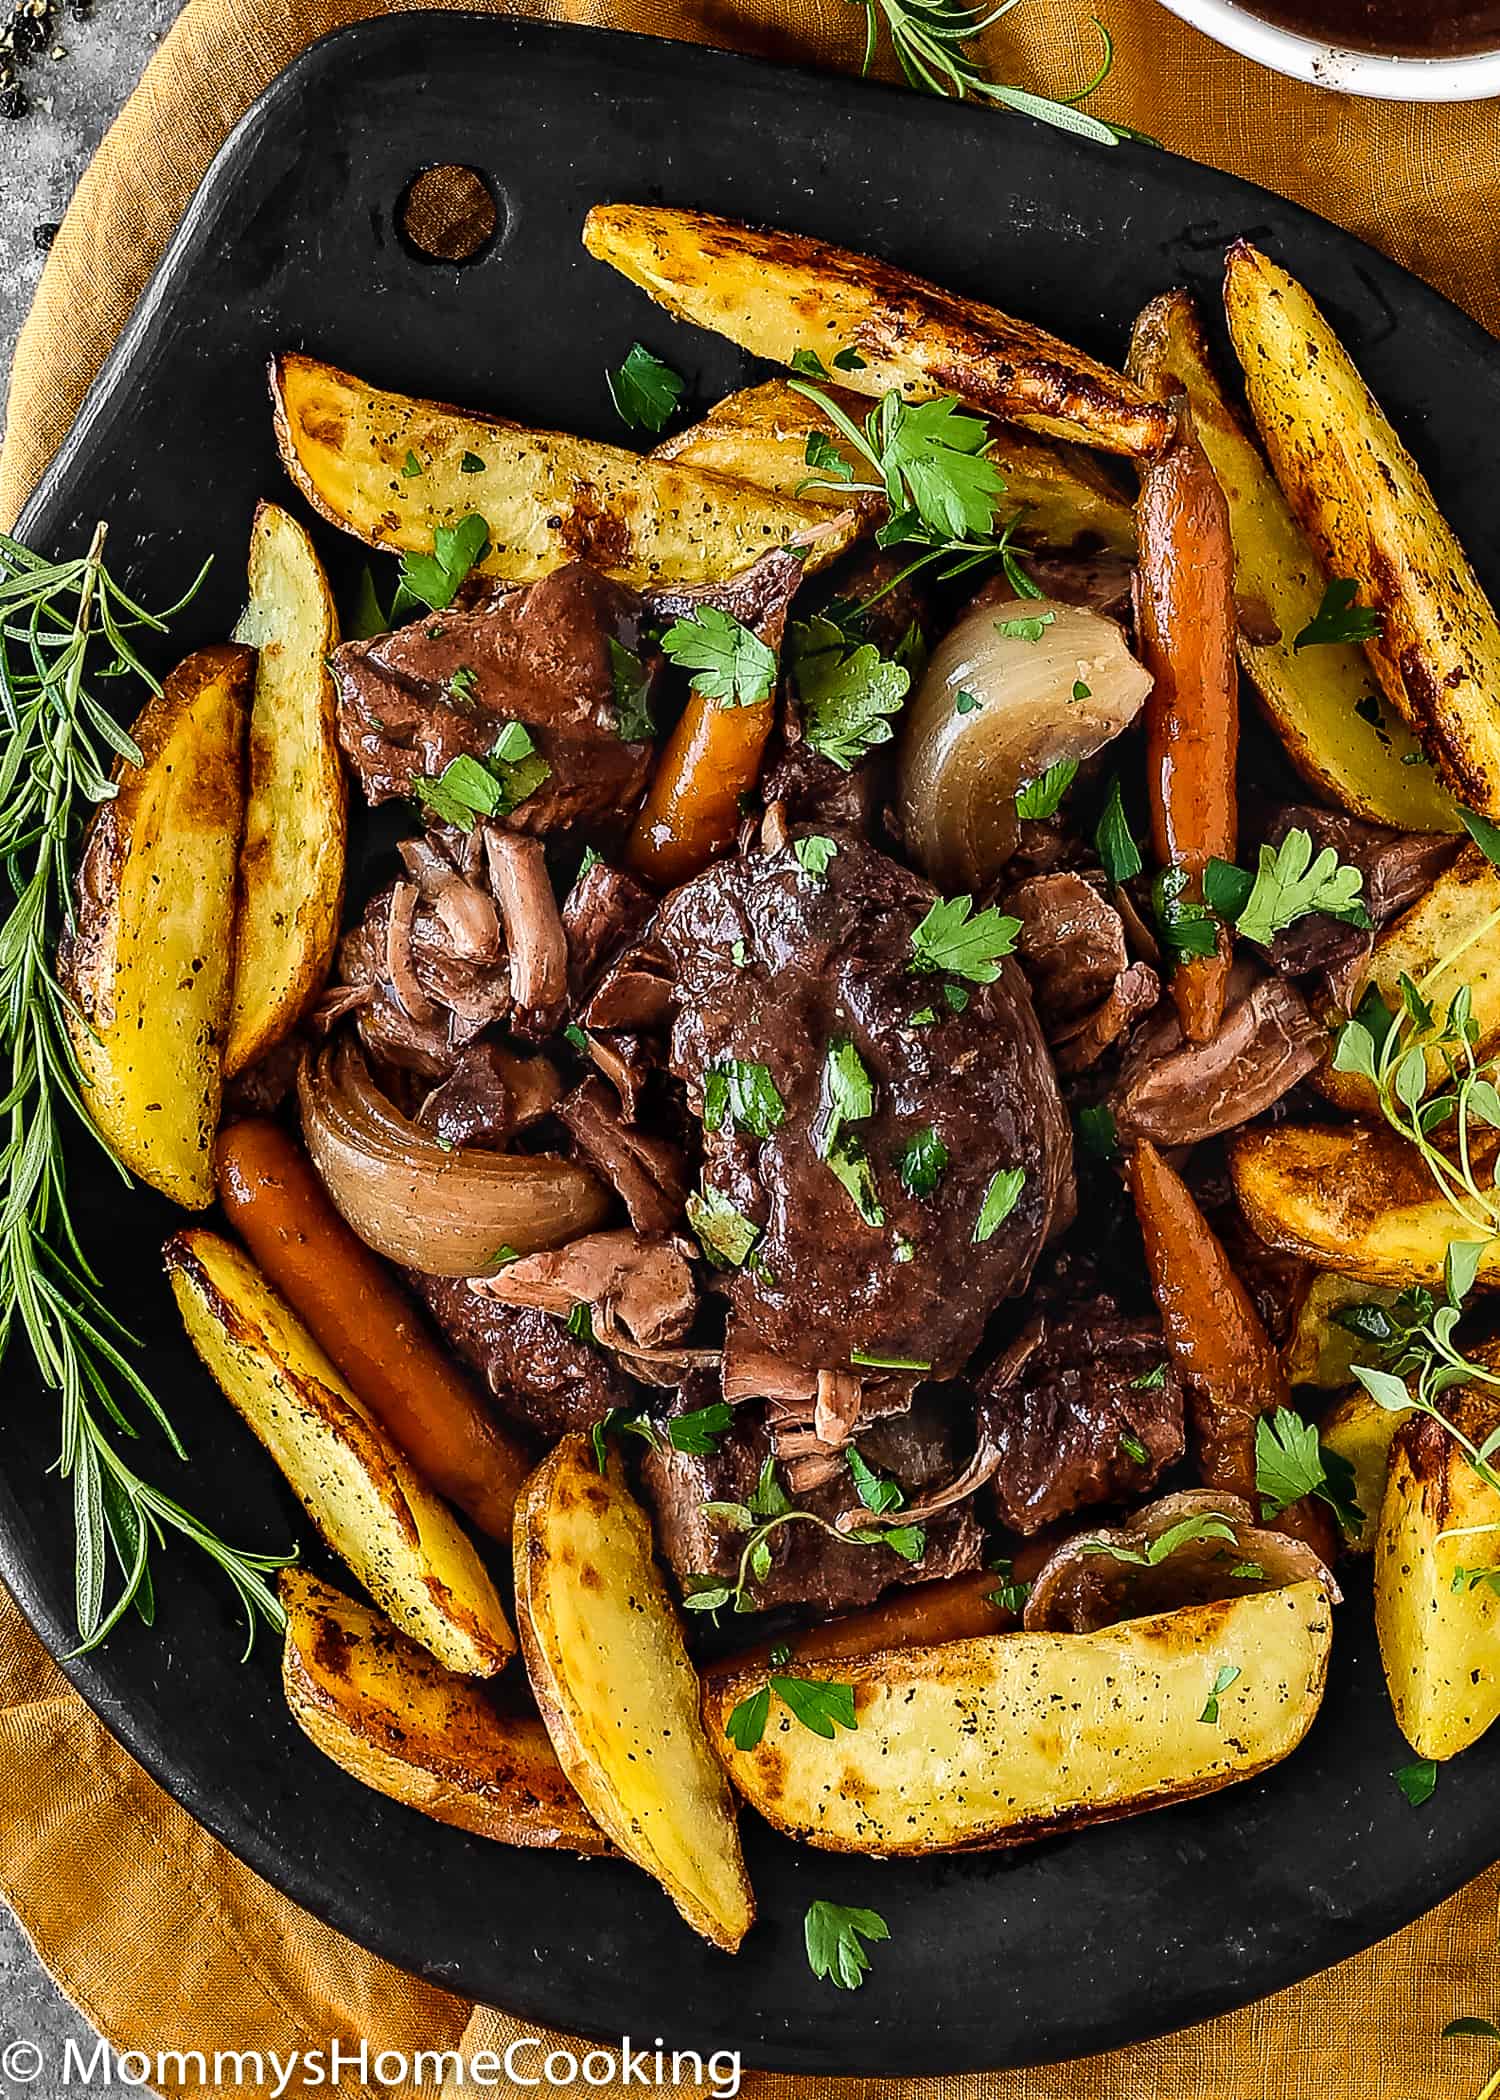 This Slow Cooker Red Wine Hind Shank is rich, hearty and super satisfying. Cook it in a slow cooker for really tender meat, this classic beef stew is enveloped in a tasty, deeply red wine flavored sauce. https://mommyshomecooking.com